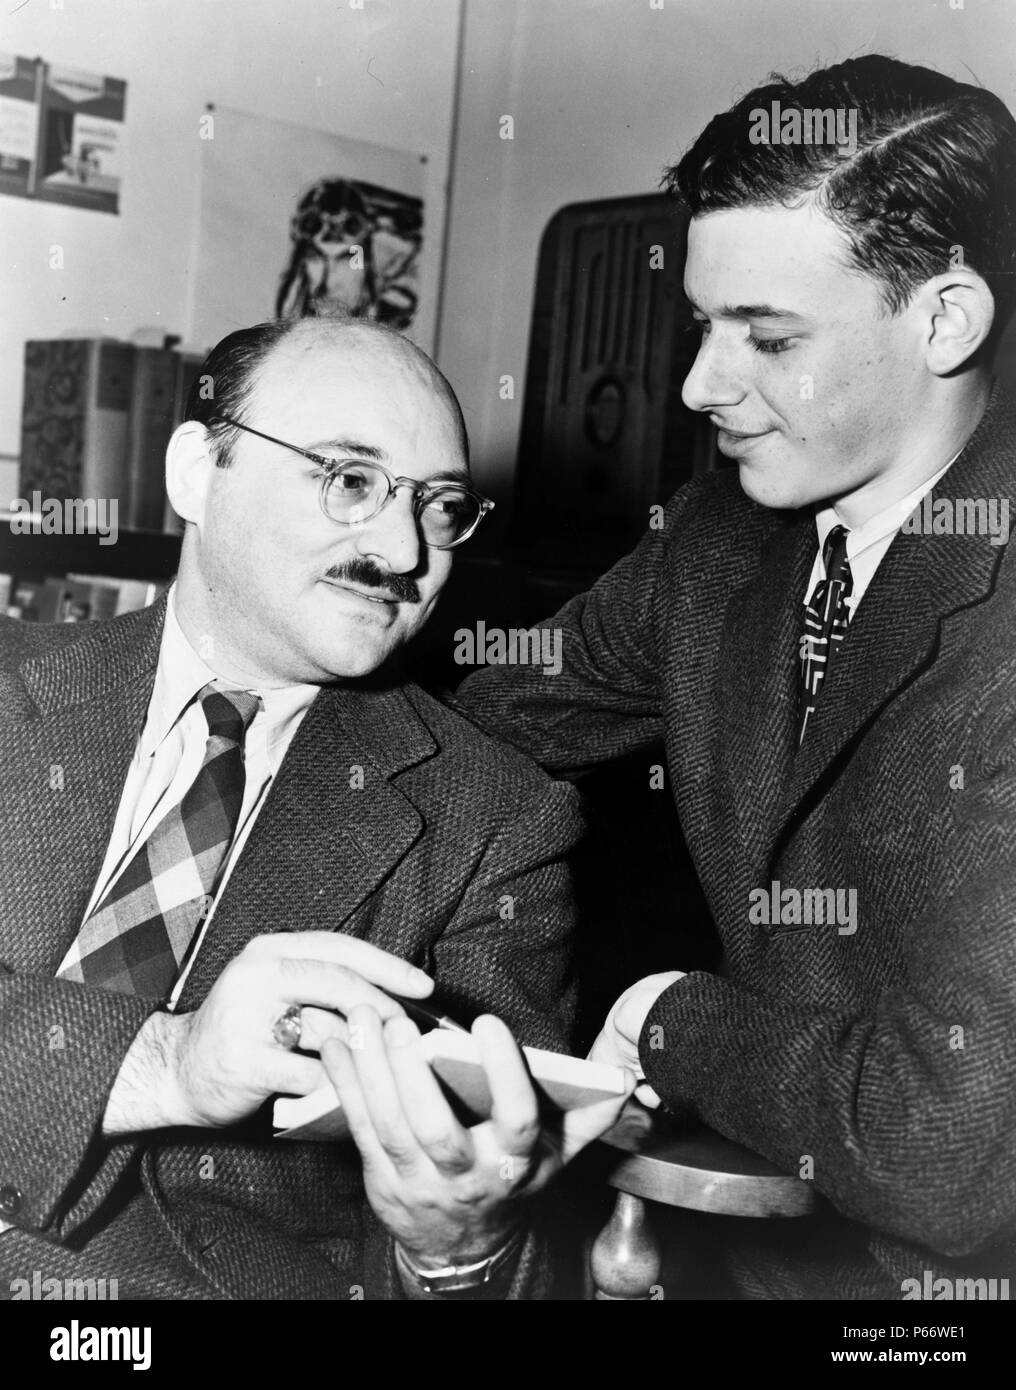 Authors Ellery Queen (left) and James Yaffe. Ellery Queen is both a fictional character and a pseudonym used by two American cousins from Brooklyn, New York—Daniel Nathan, alias Frederic Dannay (October 20, 1905 – September 3, 1982) and Manford (Emanuel) Lepofsky, alias Manfred Bennington Lee (January 11, 1905 – April 3, 1971); to write, edit, and anthologize detective fiction. Stock Photo